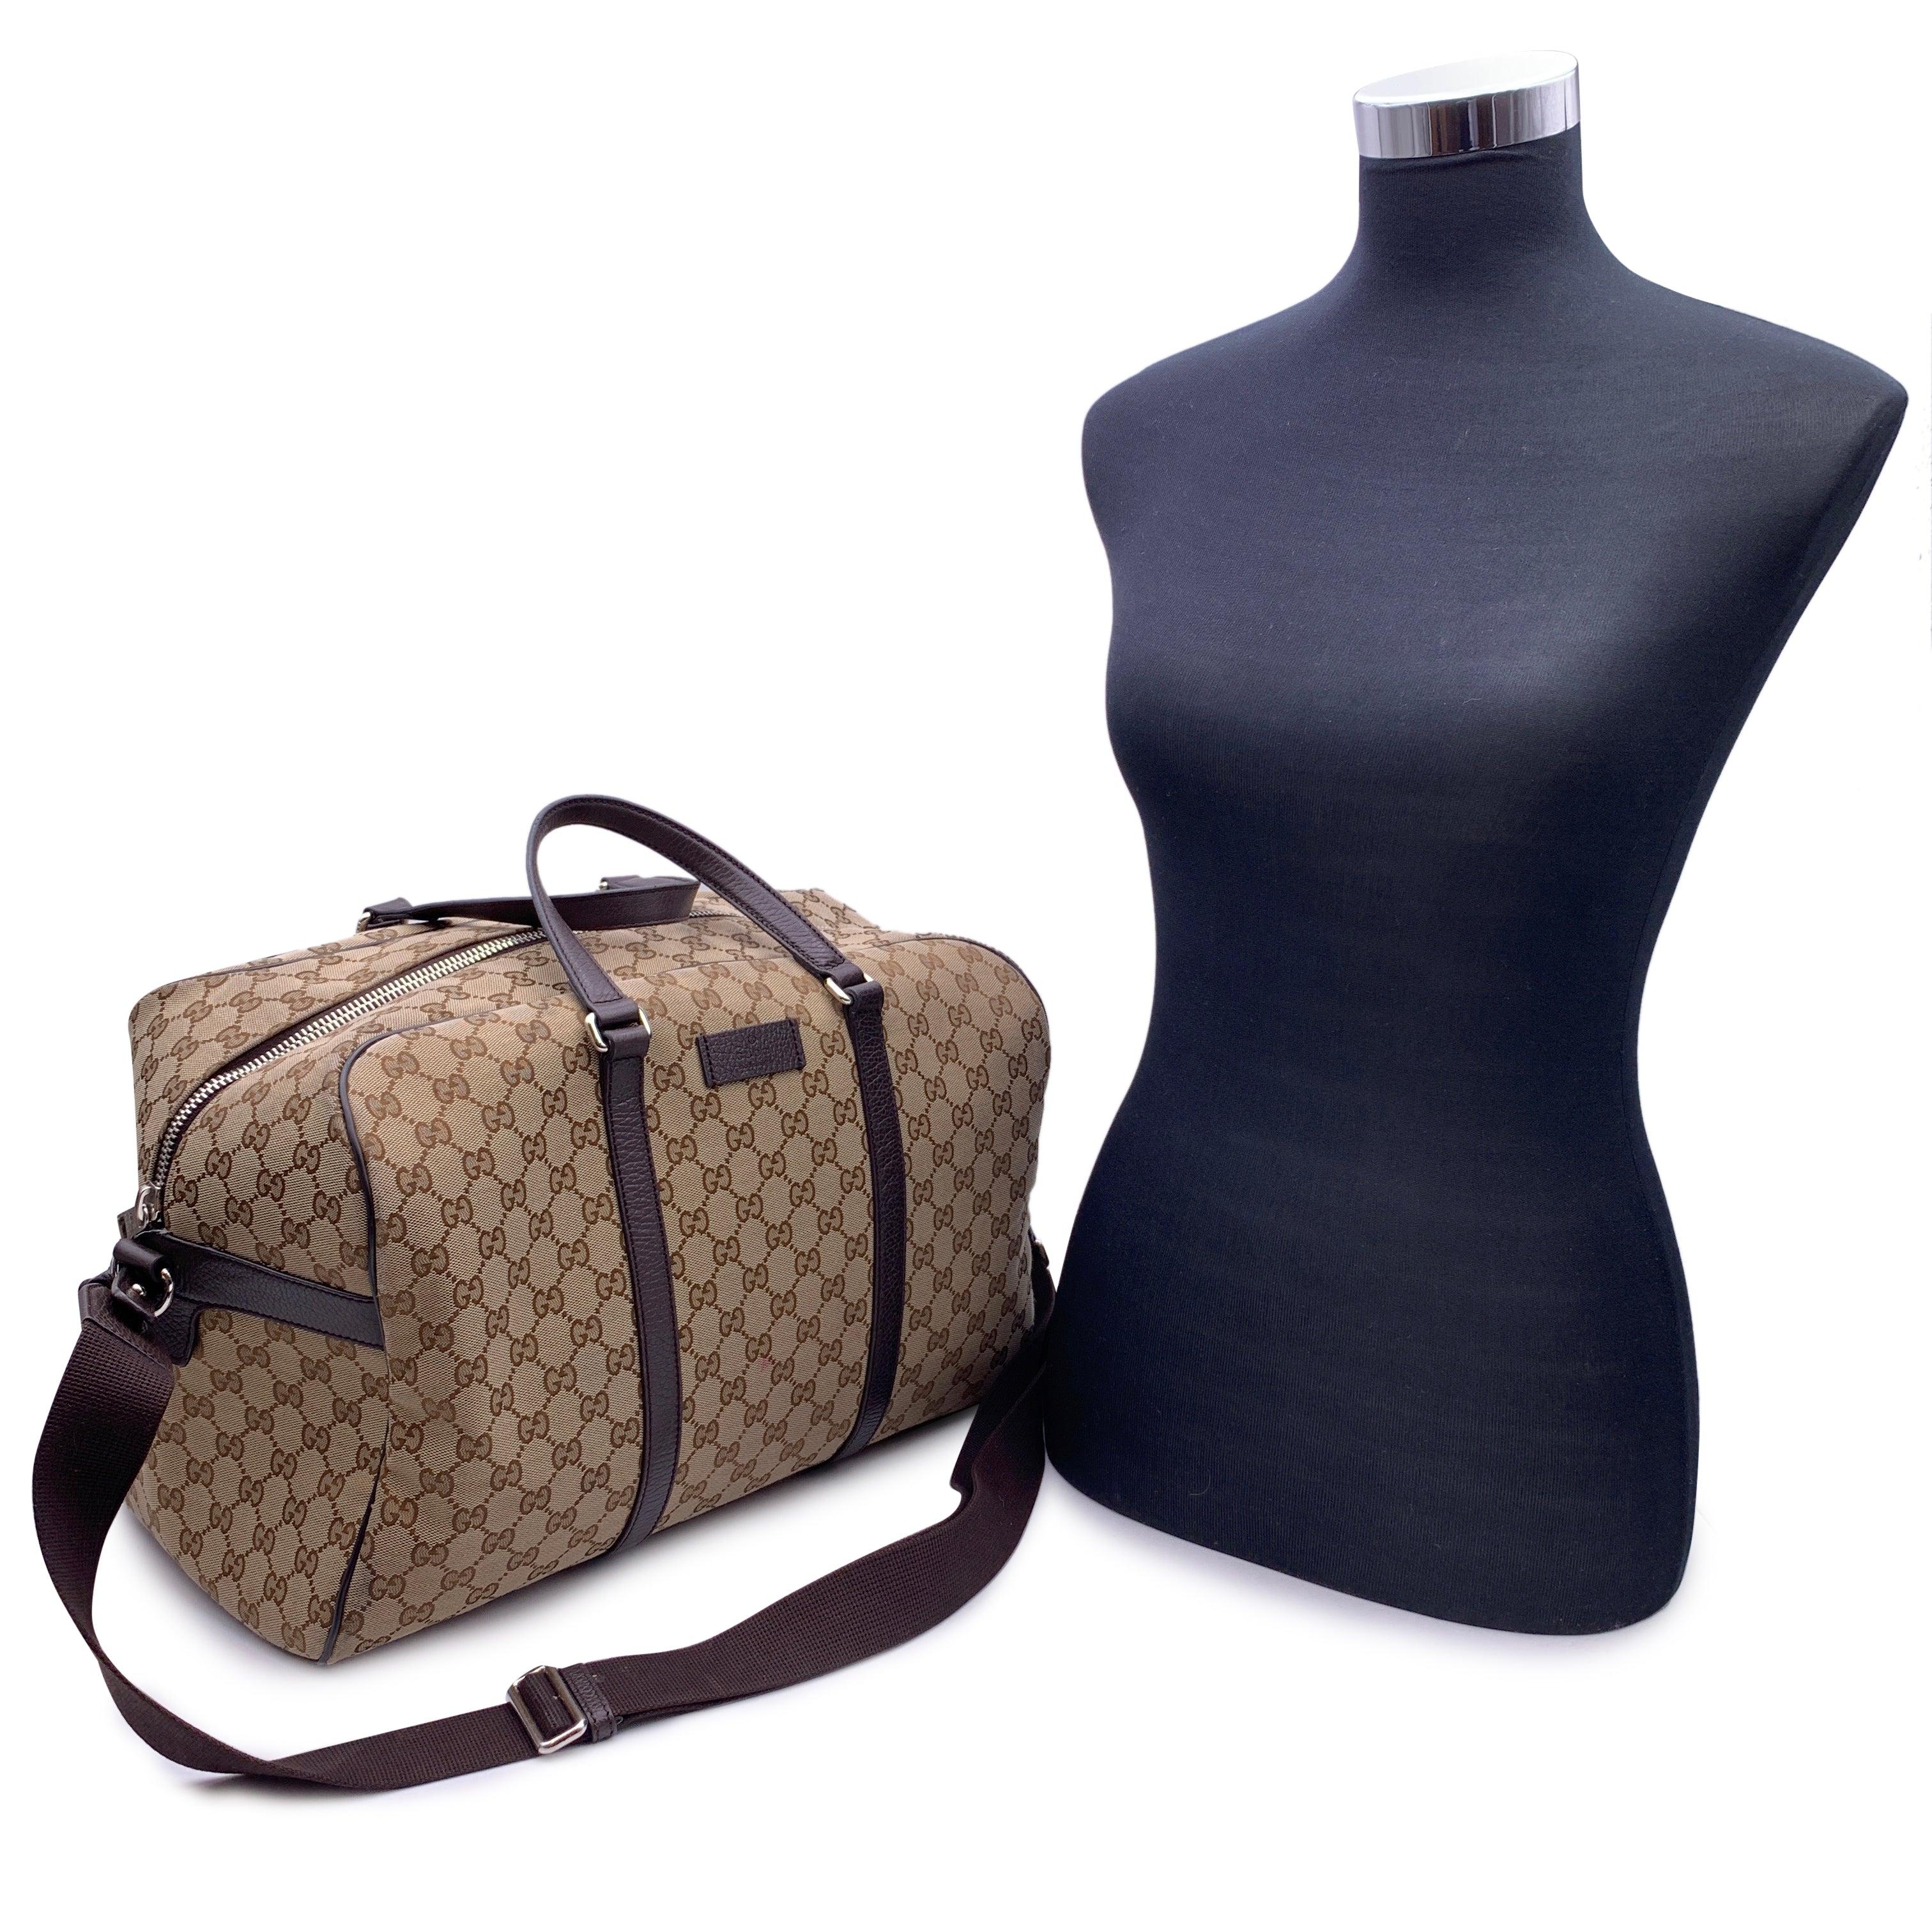 Beautiful duffle travel bag by Gucci. Crafted in beige monogram camvas It features the Gucci name patch on the front, double handles, upper zipper closure and fabric lining. 1 side zip pocket inside. Adjustable and removable shoulder strap. 'GUCCI -